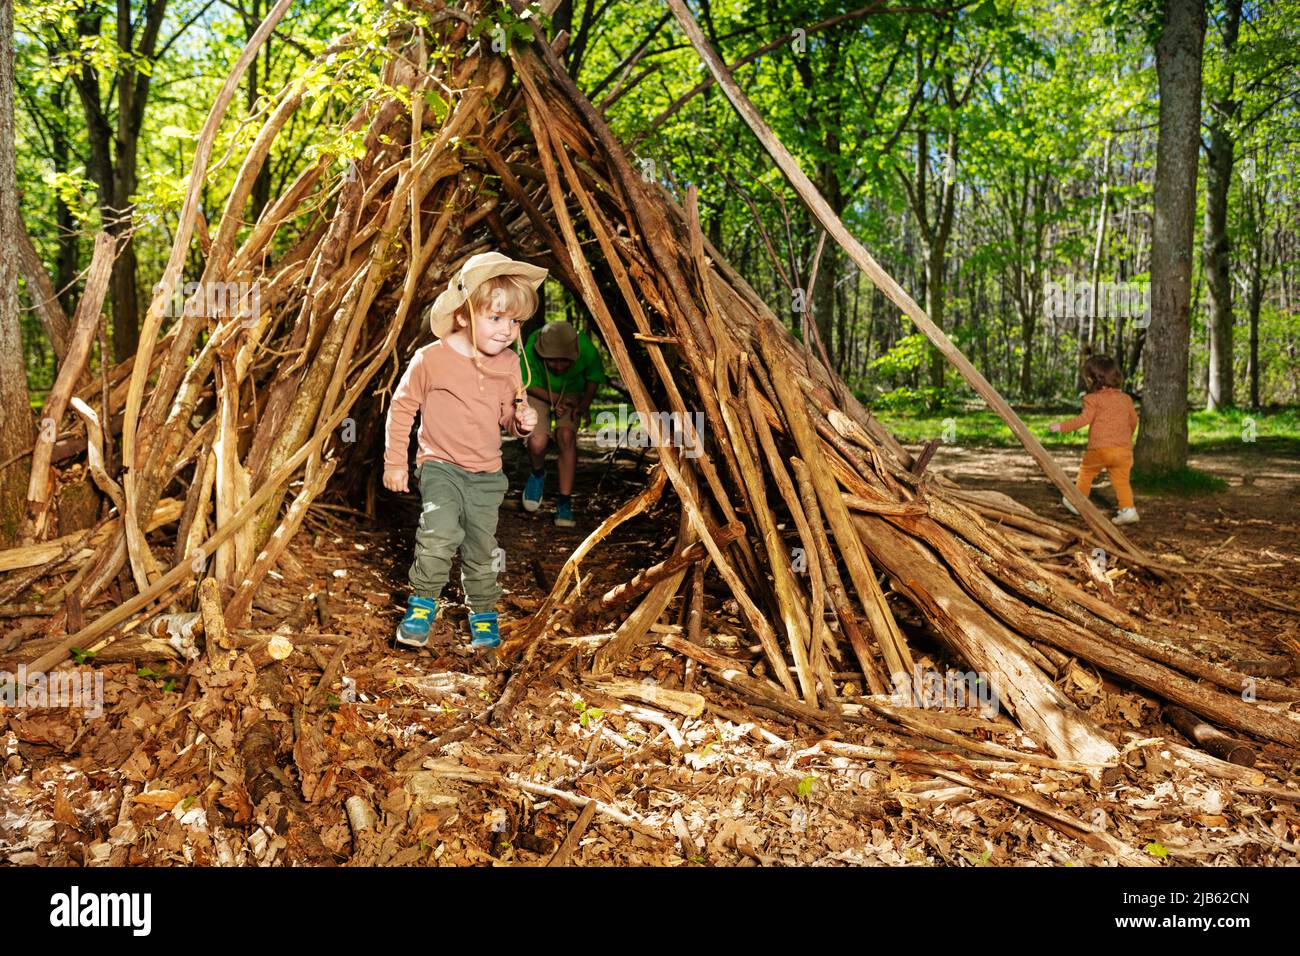 Boy with boy-scout hat plain in the forest hut of branches Stock Photo